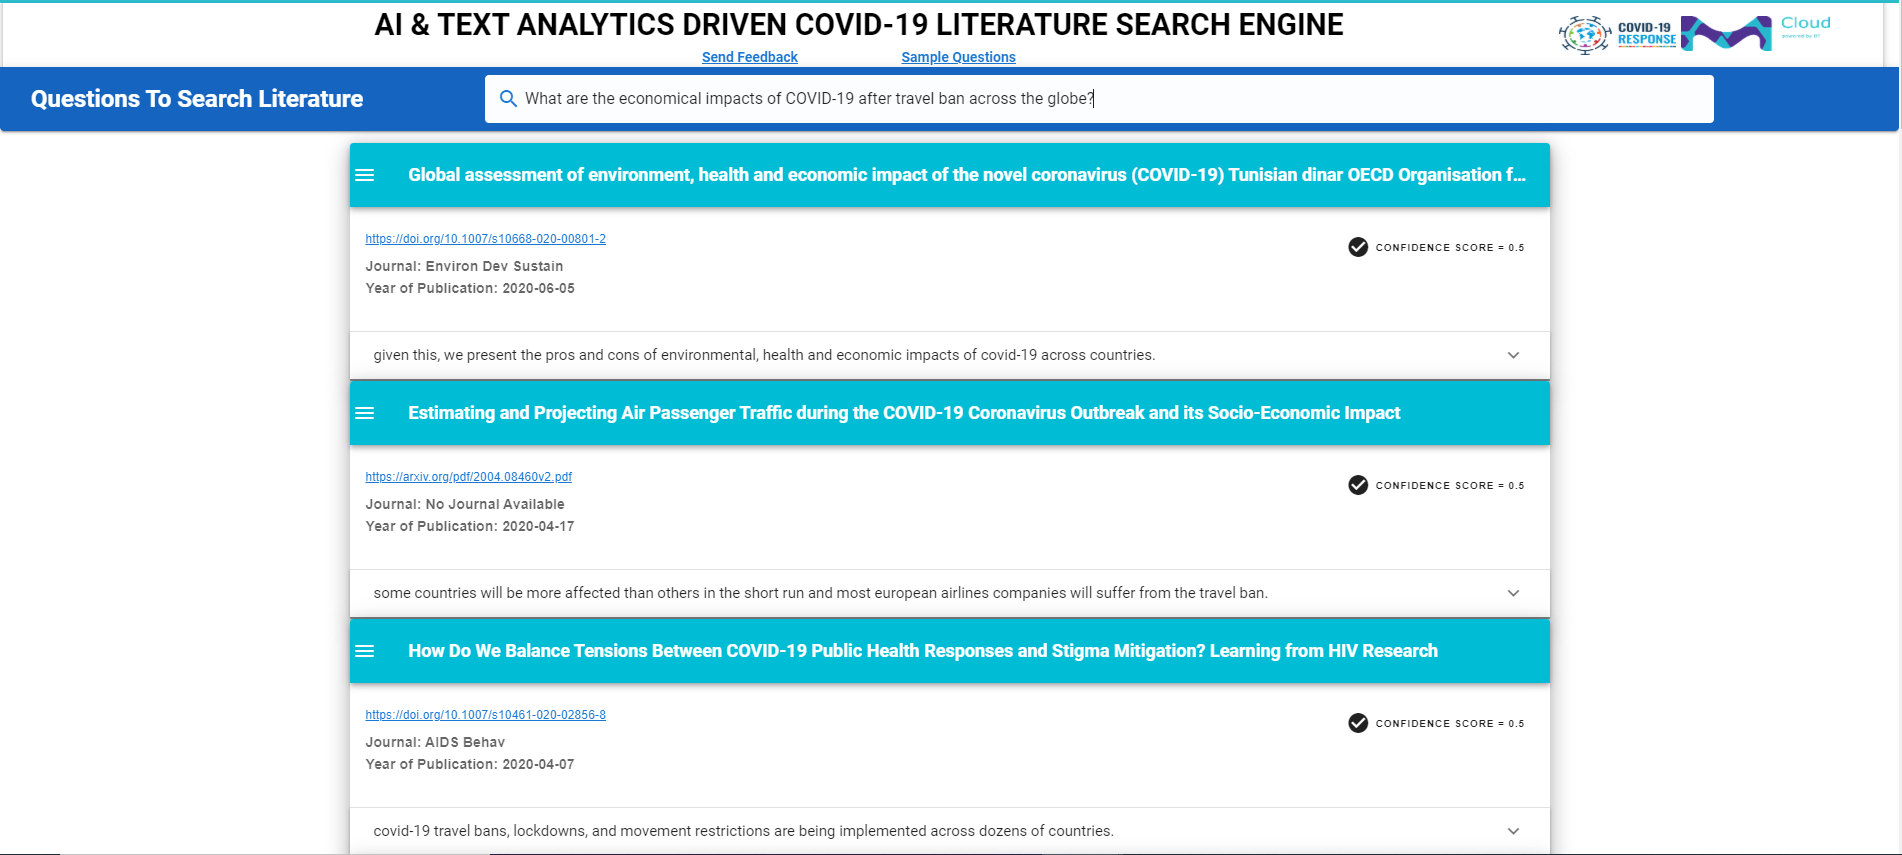 How This NLP-Driven Literature Search Engine Can Help In Extracting Relevant COVID Information For Medical Innovation